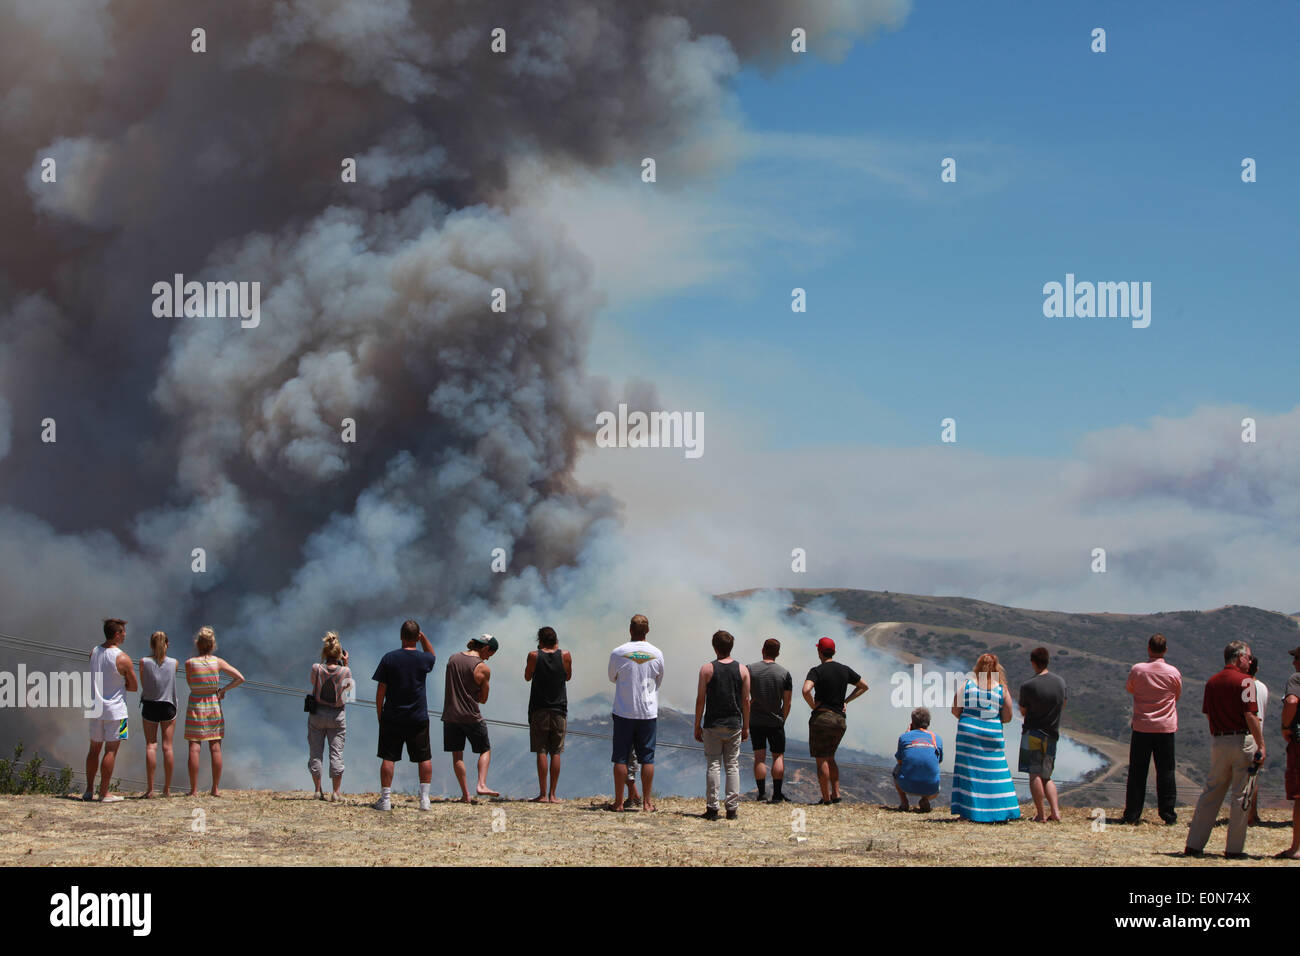 San Clemente, California, USA. 16th May, 2014. San Clemente residents watch and take pictures with cellphones of fire fighting aircraft as the Las Pulgas wildfire burns inside Camp Pendleton marine Base. The wildfire in the western region of Camp Pendleton has grown to 8,000 acres burned, base officials confirmed, known as the Las Pulgas Fire, is 5 percent contained, officials said. California firefighters have continued to battle wildfires, which have scorched more than 11,000 acres and caused thousands to evacuate. Credit:  ZUMA Press, Inc./Alamy Live News Stock Photo